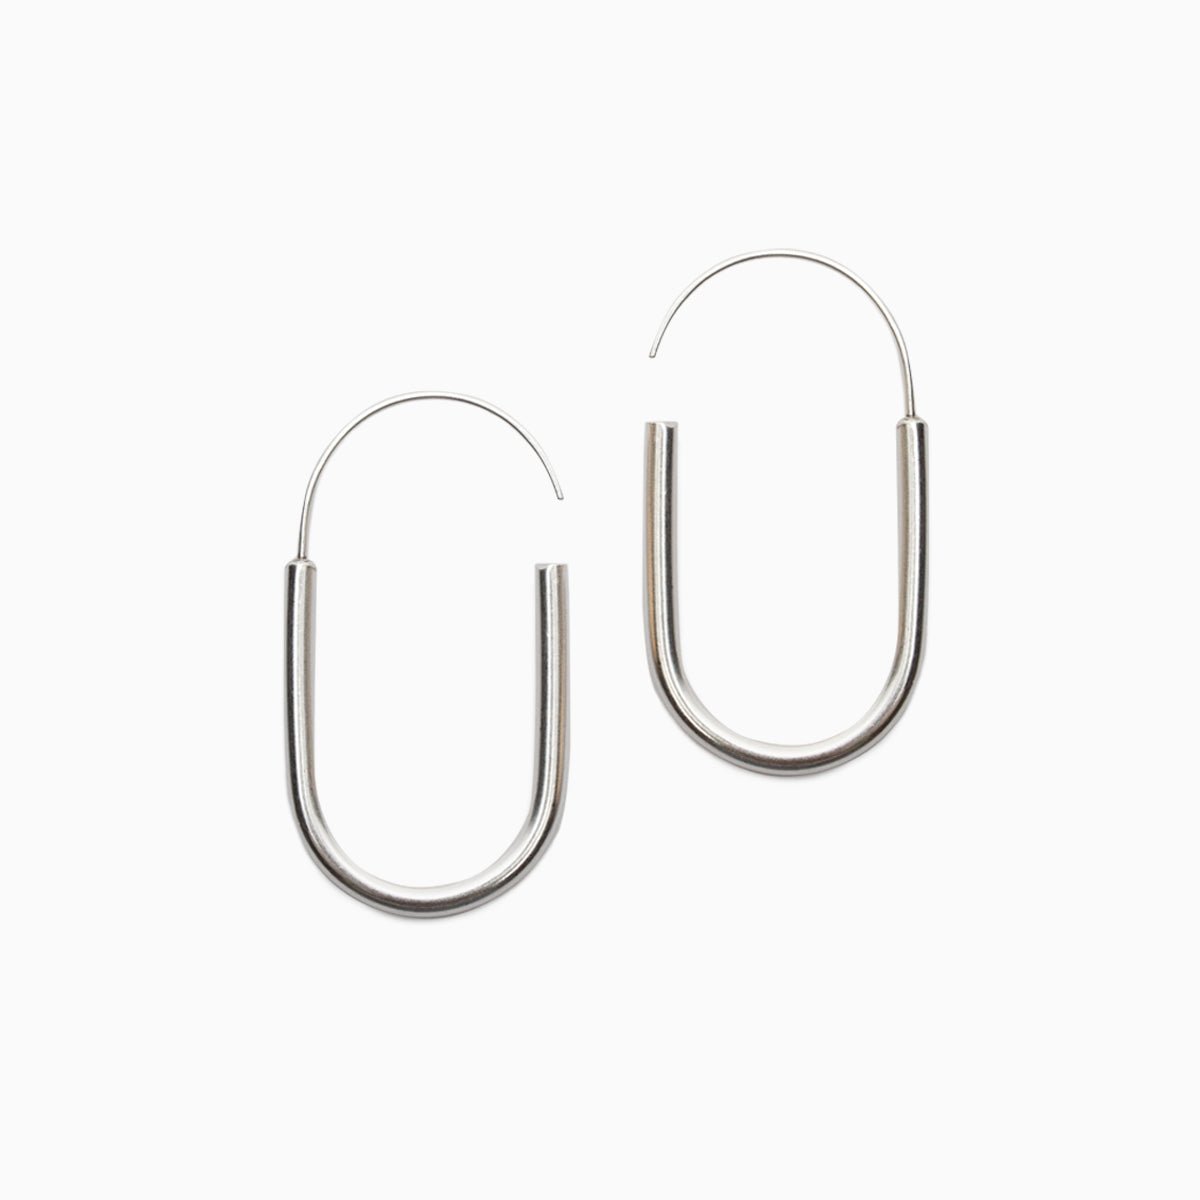 A small sterling silver U-shaped earring with an arched sterling silver ear wire that leaves a slight opening. Designed and handcrafted in Portland, Oregon.